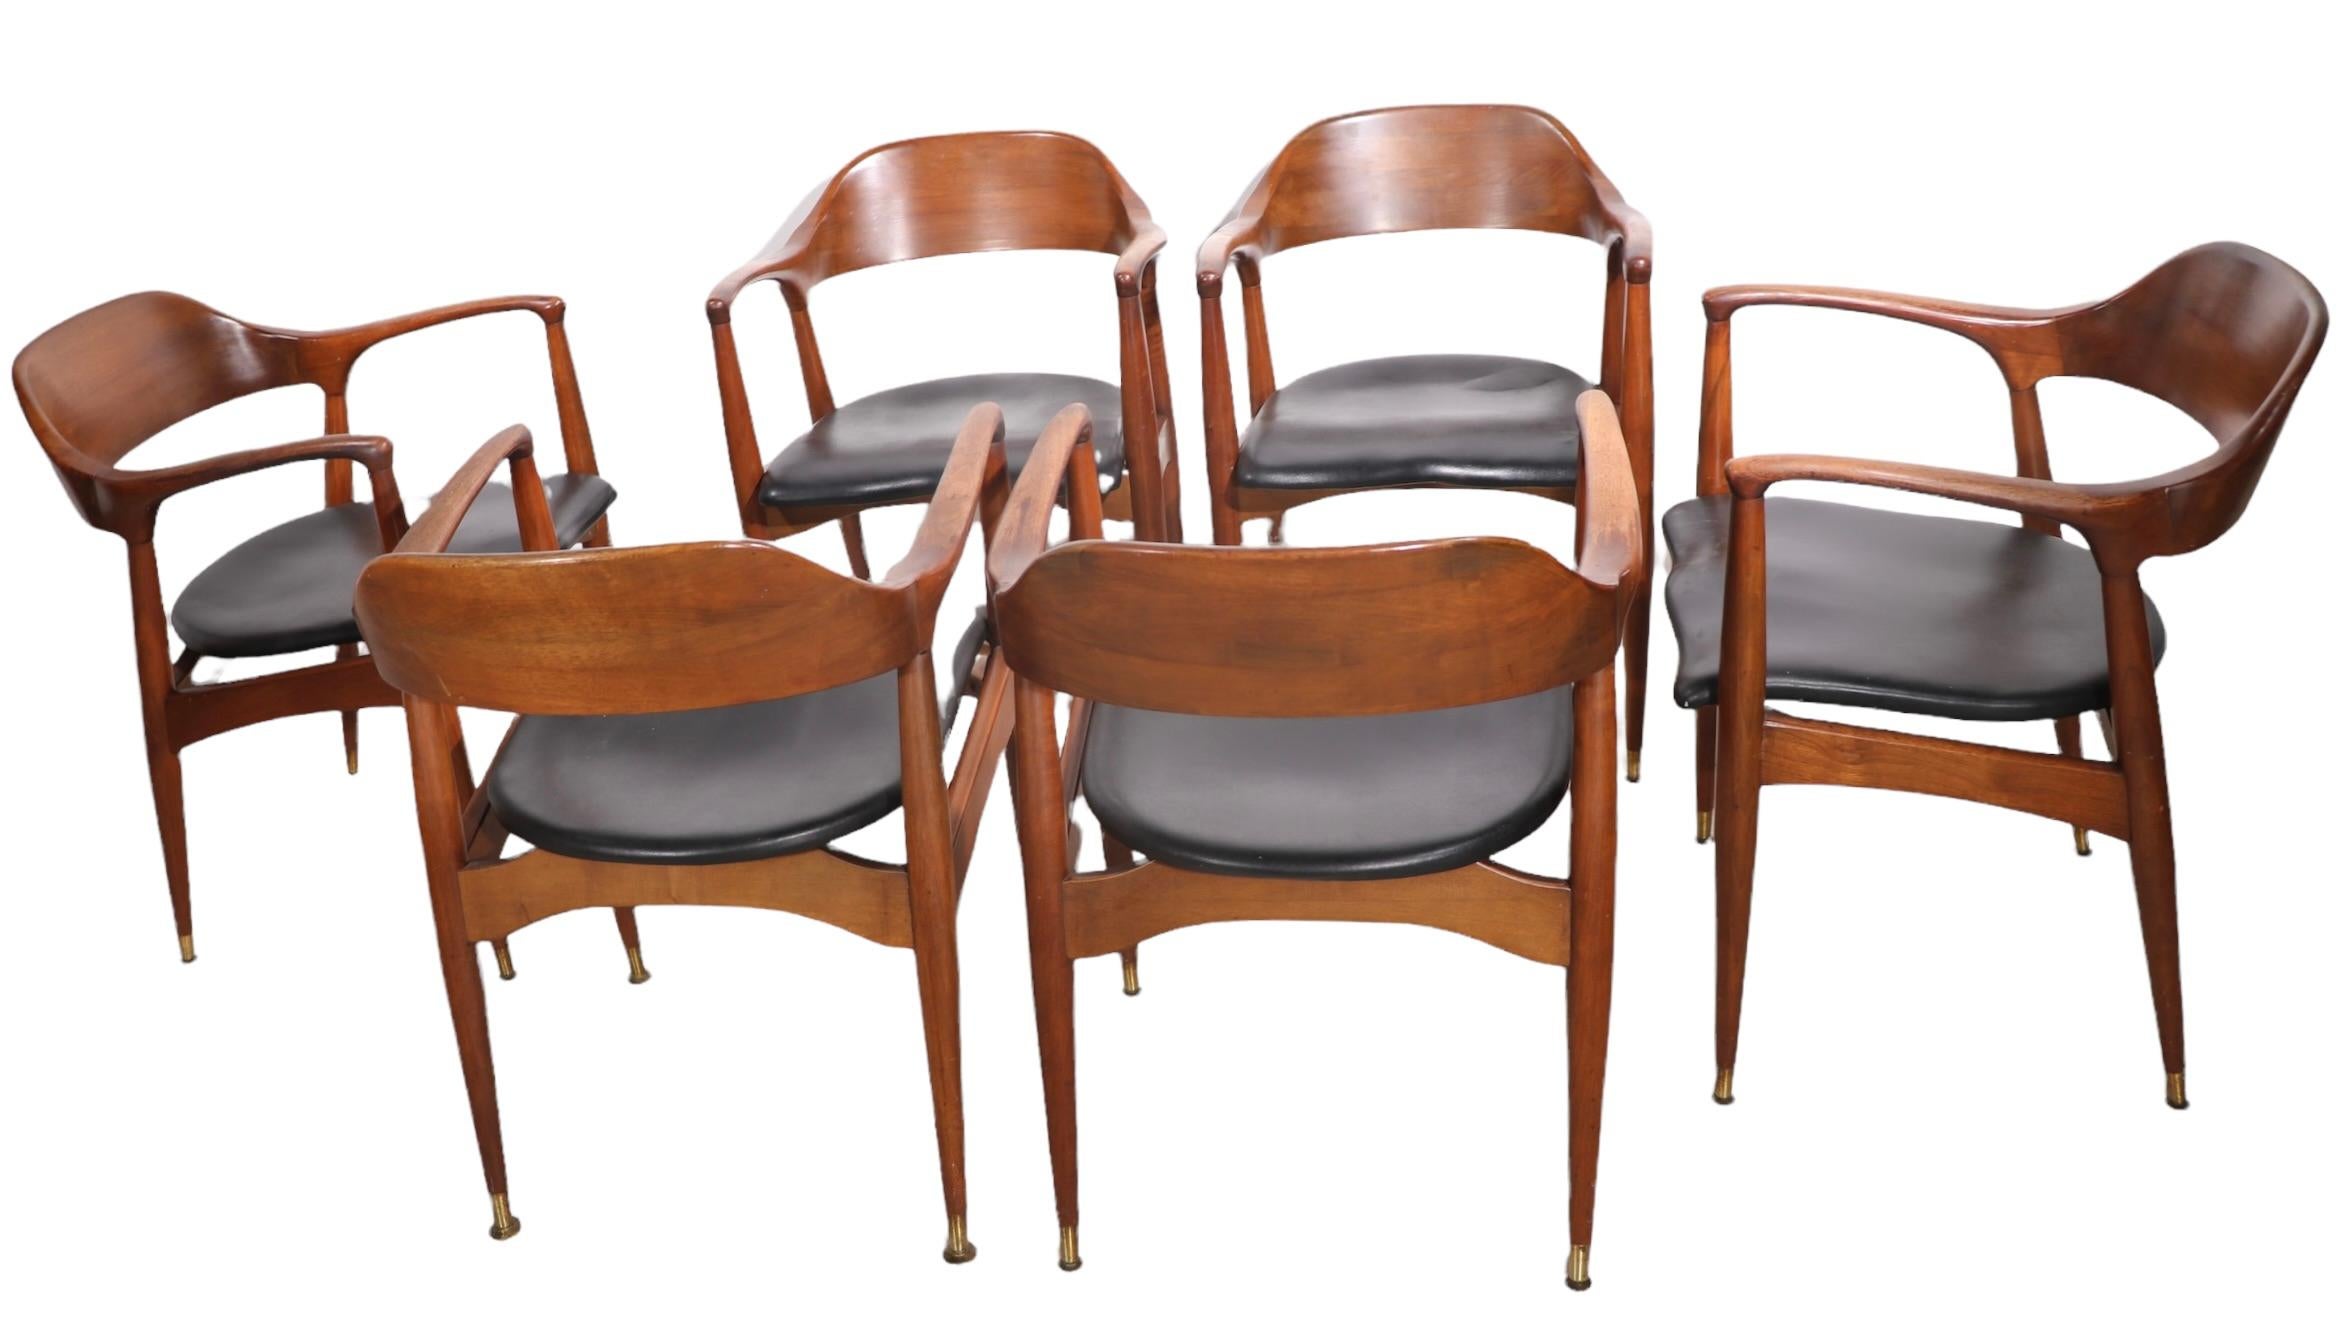 Upholstery 6 Mid Century Dining Arm Chairs by Jack Van der Molen for Jamestown Furniture